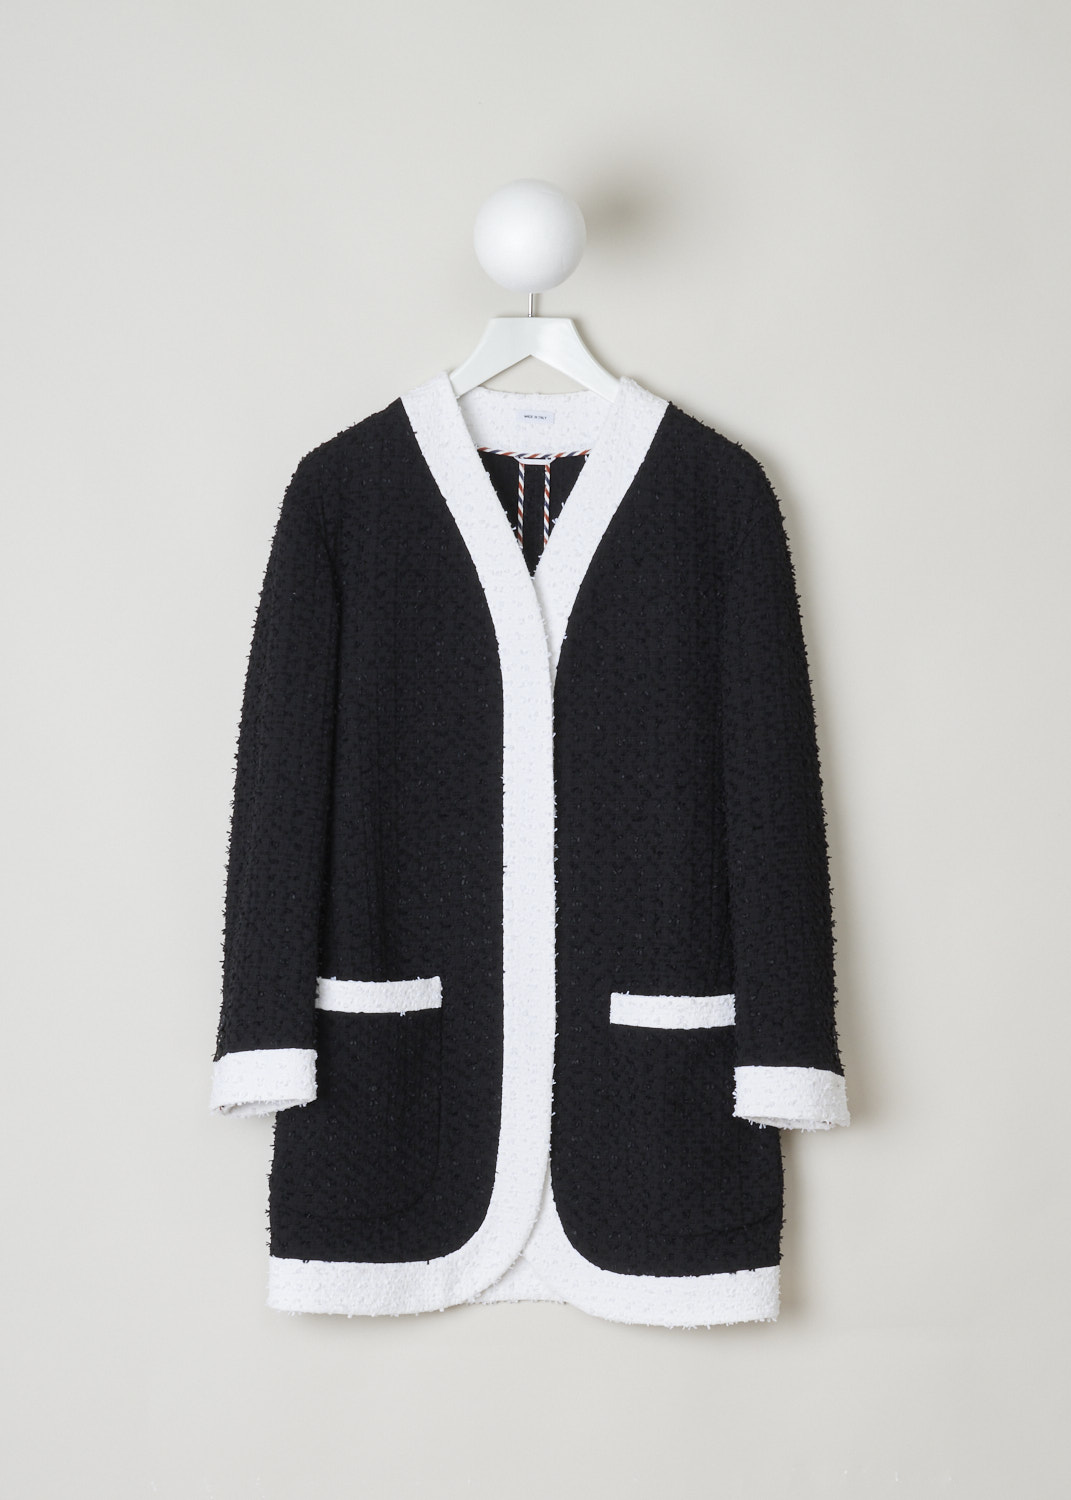 Thom Browne, Unconstructed menswear fit cardigan in solid eyelash yarn tweed, FBC679C_06751_001, Black, White, Front, Unconstructed black and white cardigan jacket made from solid eyelash yarn tweed. The jacket has a menswear fit with dropped shoulders. The buttons are concealed by the contrasting white trims. The cardigan has two pockets on the front, which are also adorned with contrasting trims.